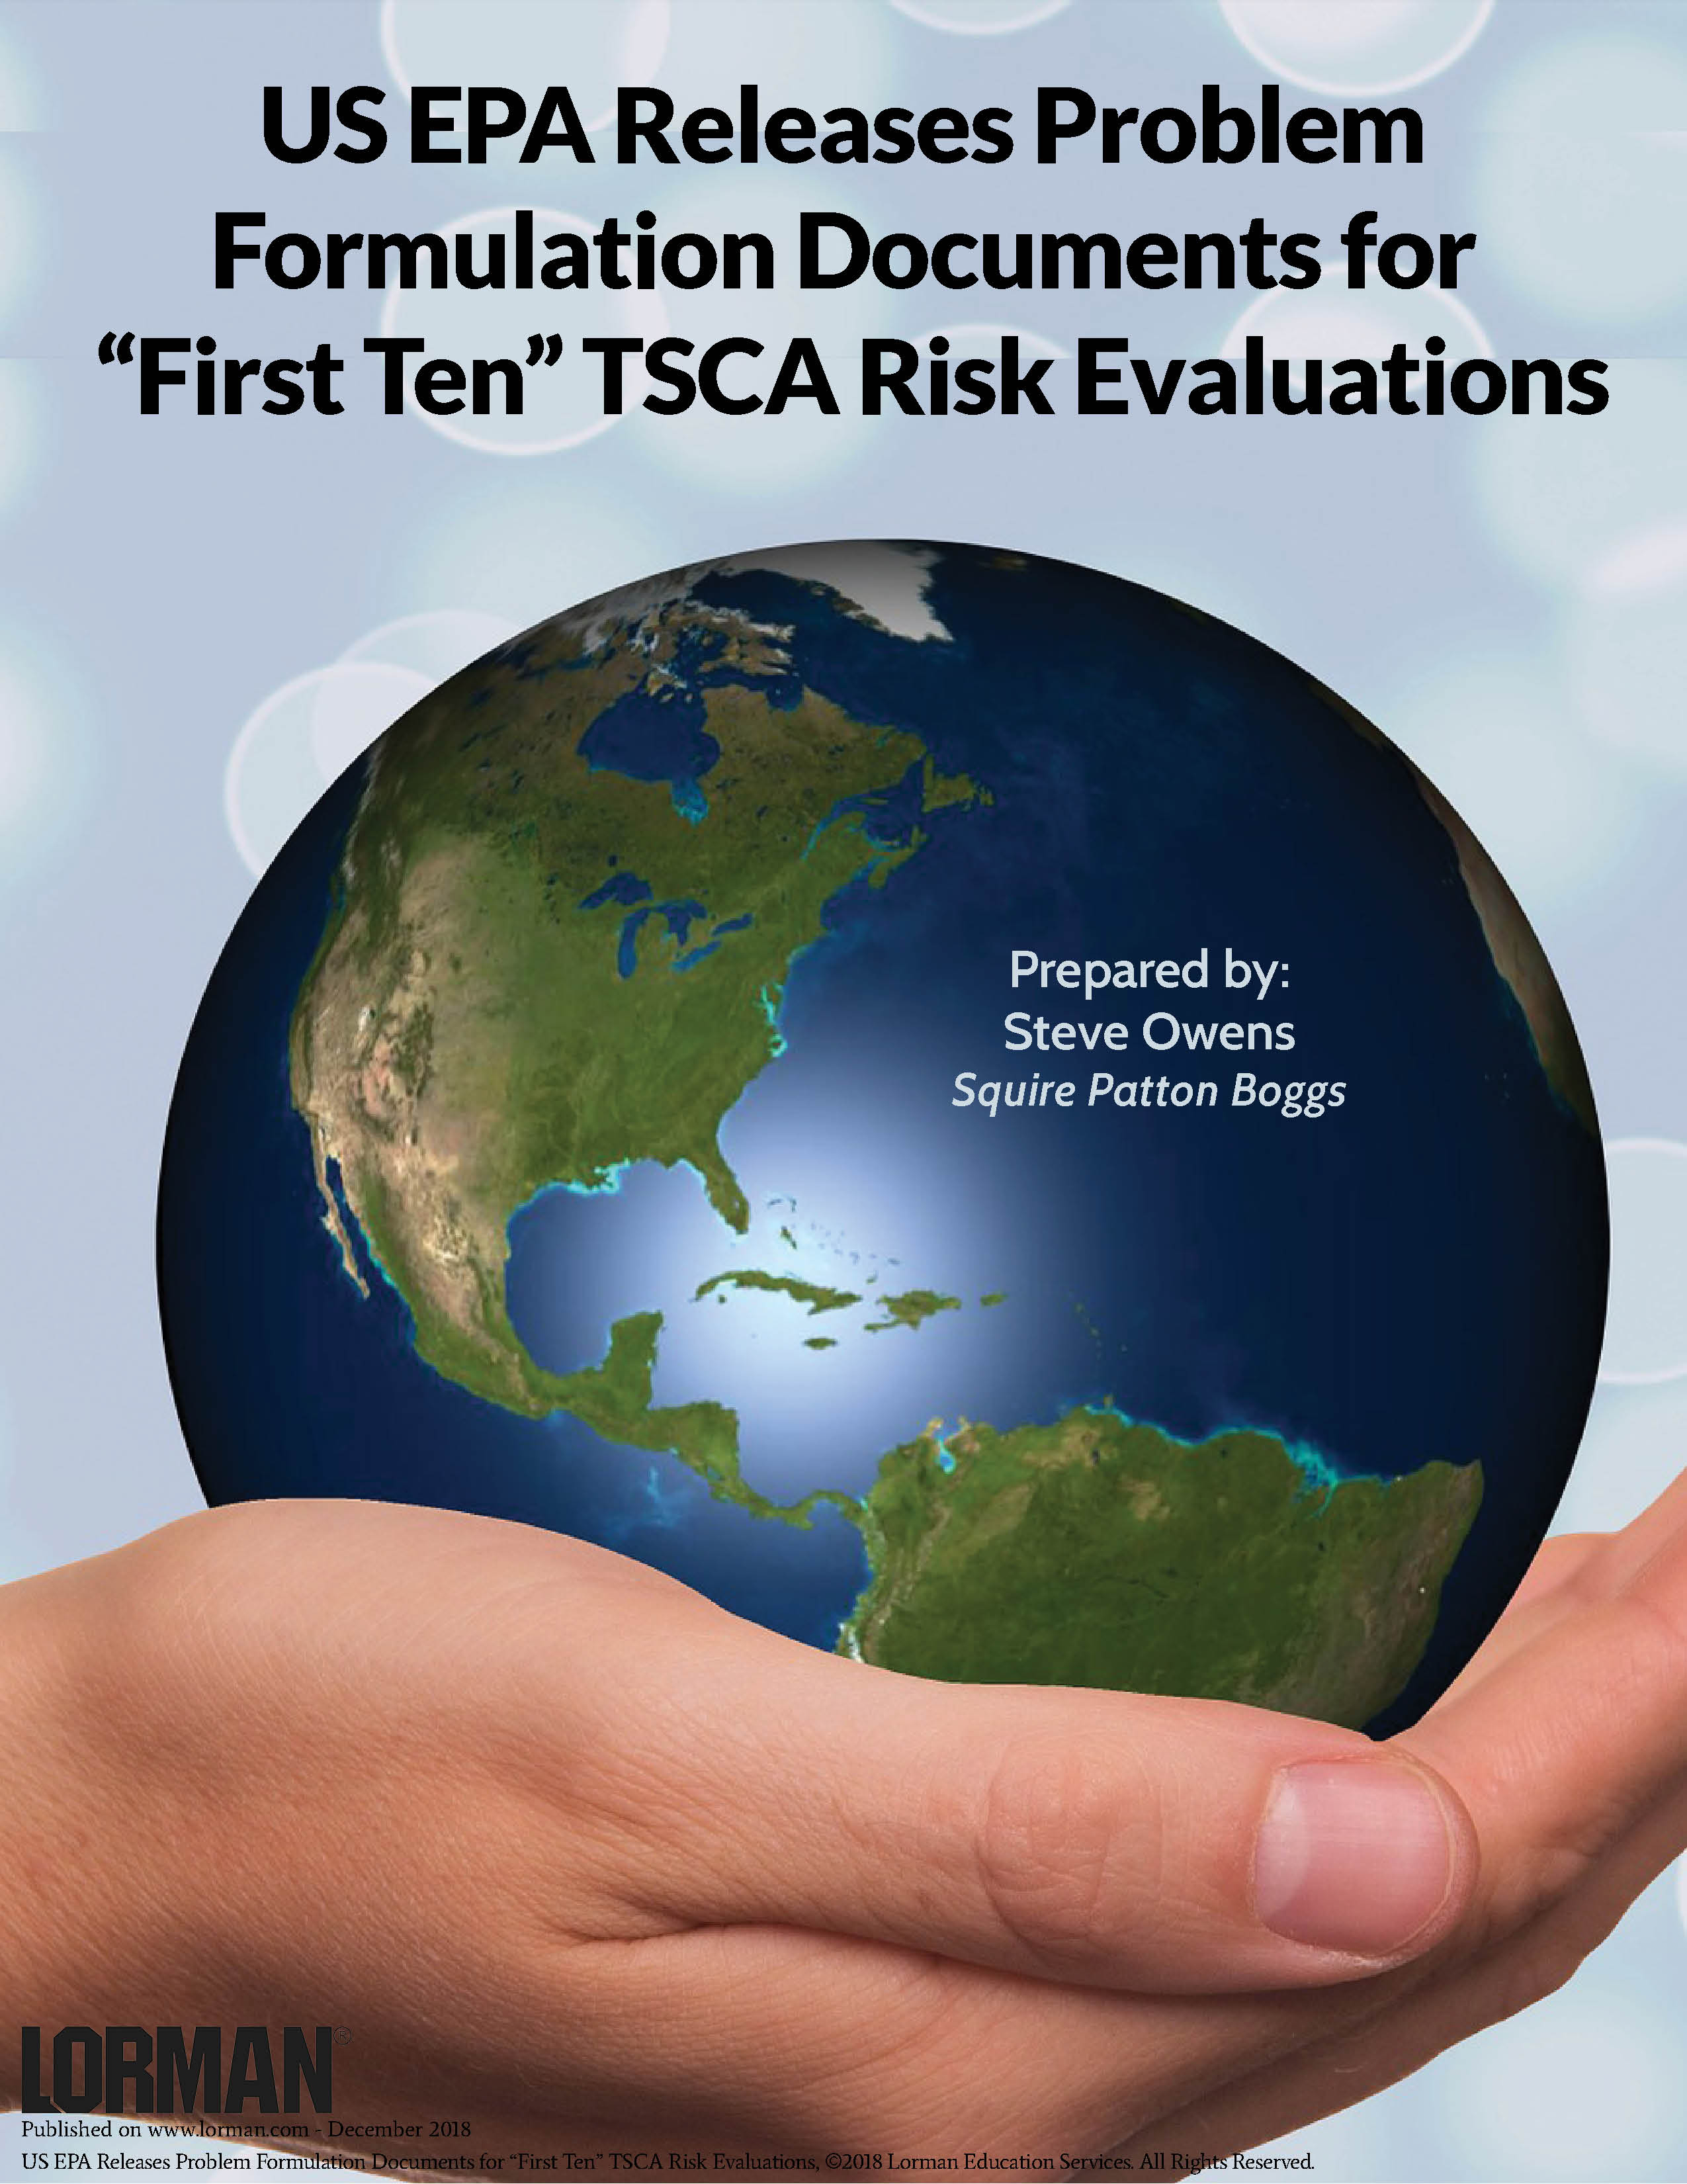 US EPA Releases Problem Formulation Documents for “First Ten” TSCA Risk Evaluations